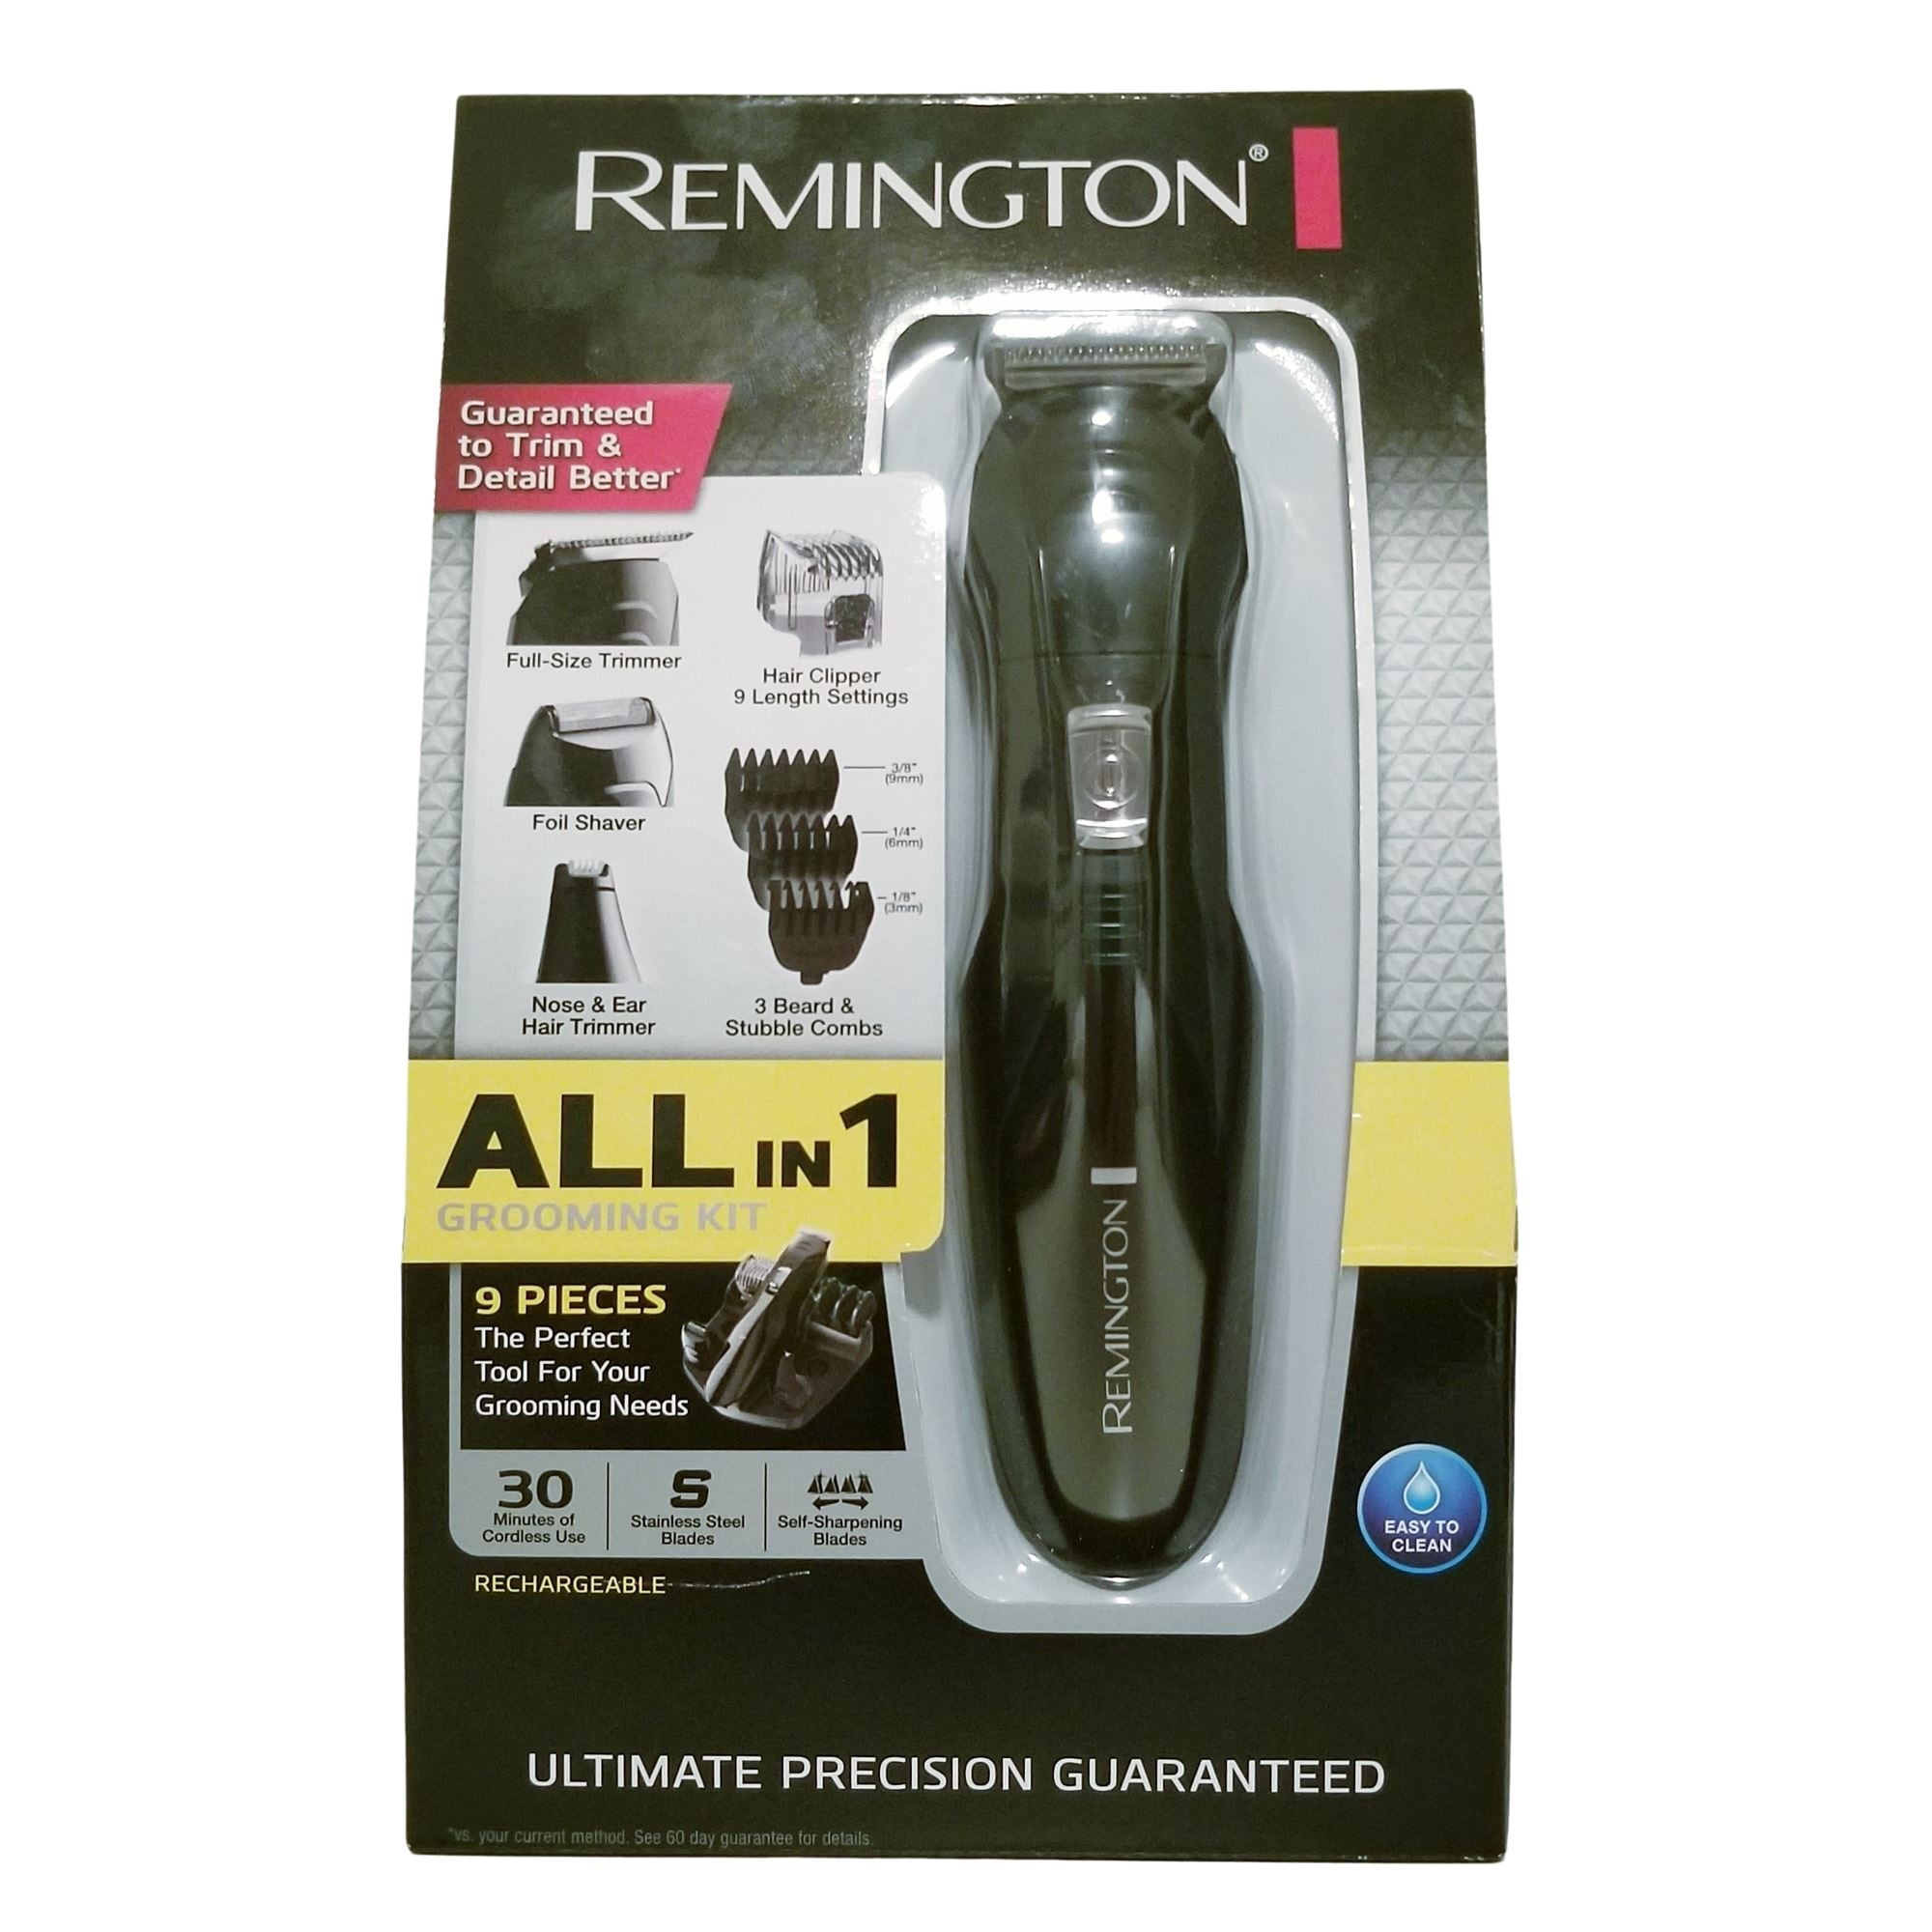 Remington 9 Piece All In 1 Grooming Kit Pg6017 Detail Trimmer Hair Clippers Walmart Com